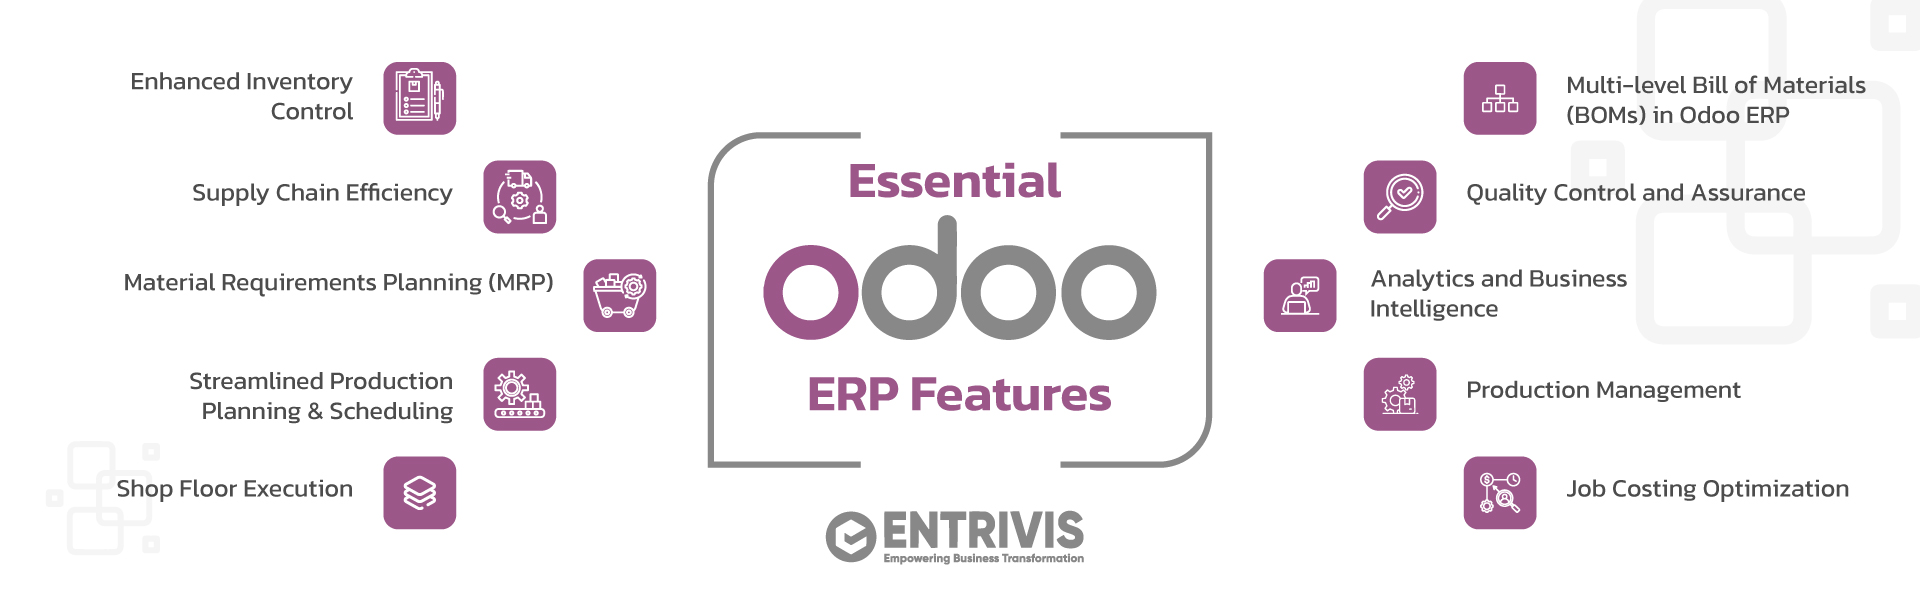 10 Essential Odoo ERP Features